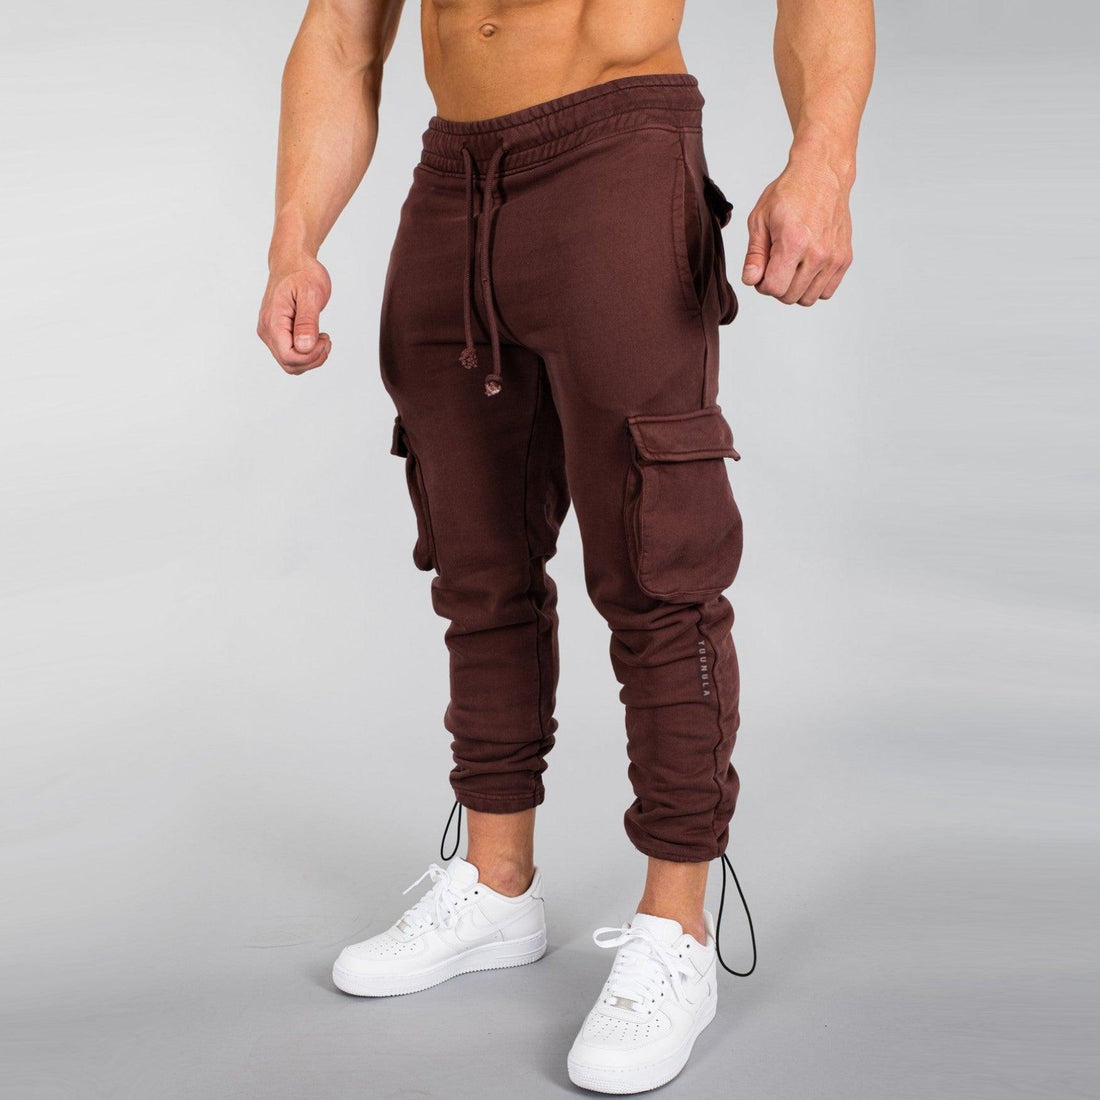 Muscle Stretch Slim Skinny Track Pants - Fashion - Your-Look